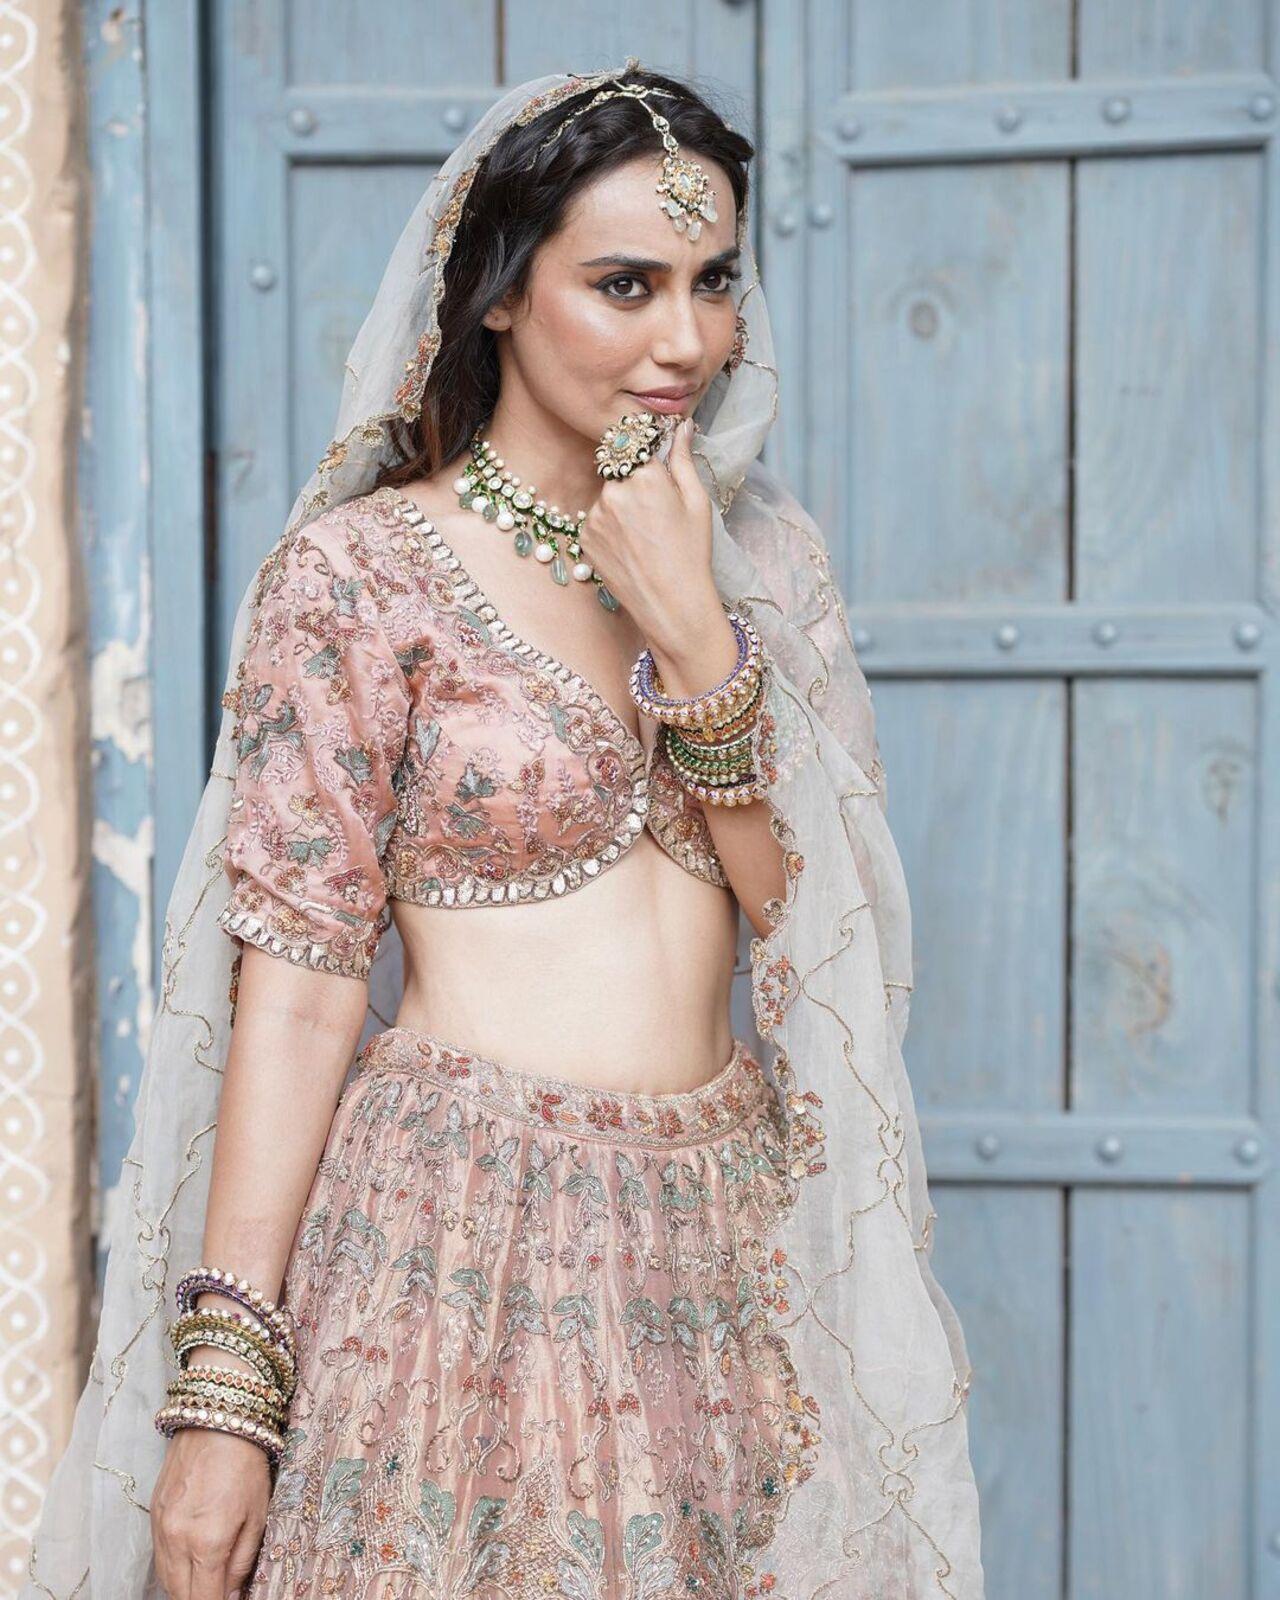 In this look, Surbhi Jyoti shelled fashion goals as she effortlessly mastered a traditional lehenga choli. Dressed in an exquisite heavy-embroidered peach lehenga set, she looked absolutely stunning 